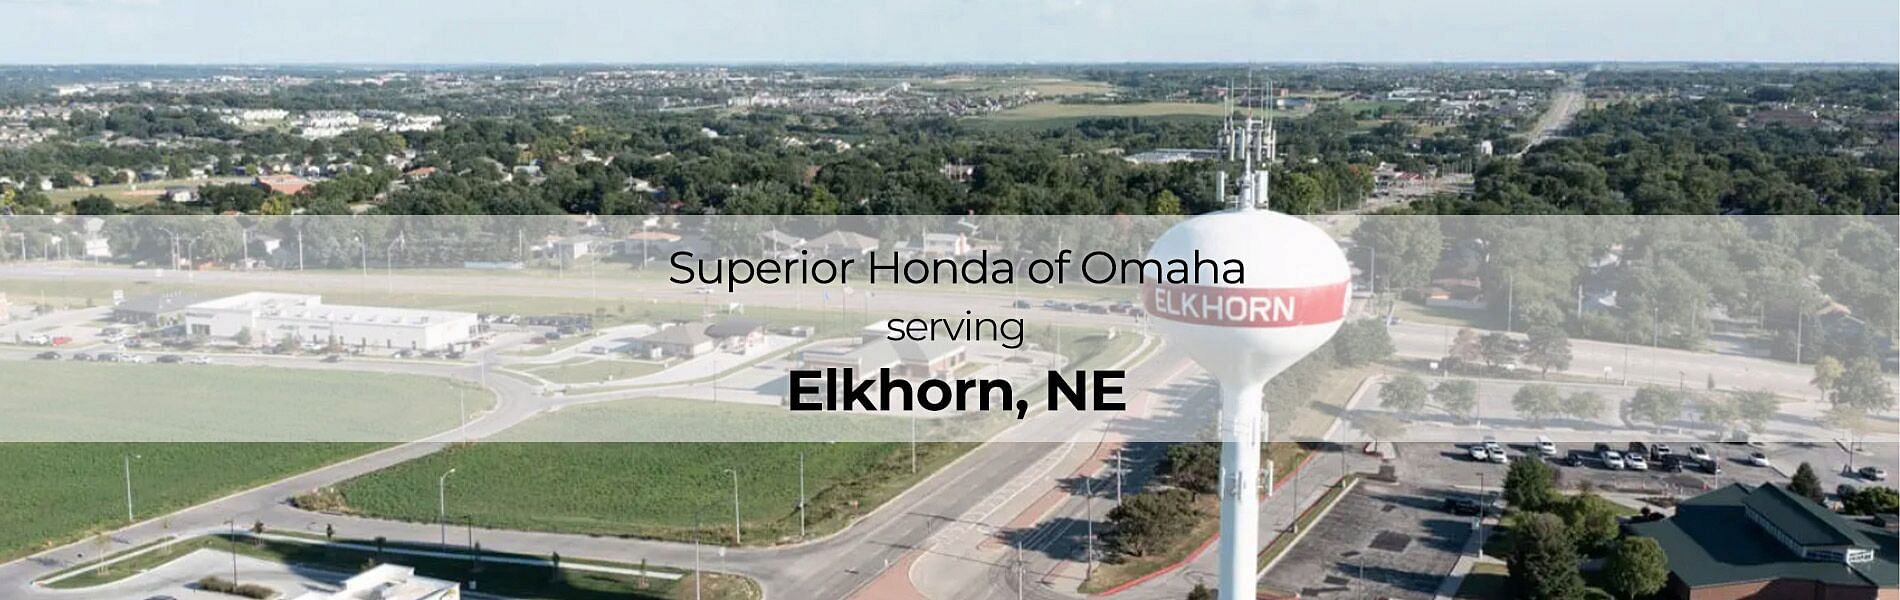 Village in the background with the inscription in front: Superior Honda of Omaha Serving Fremont, NE